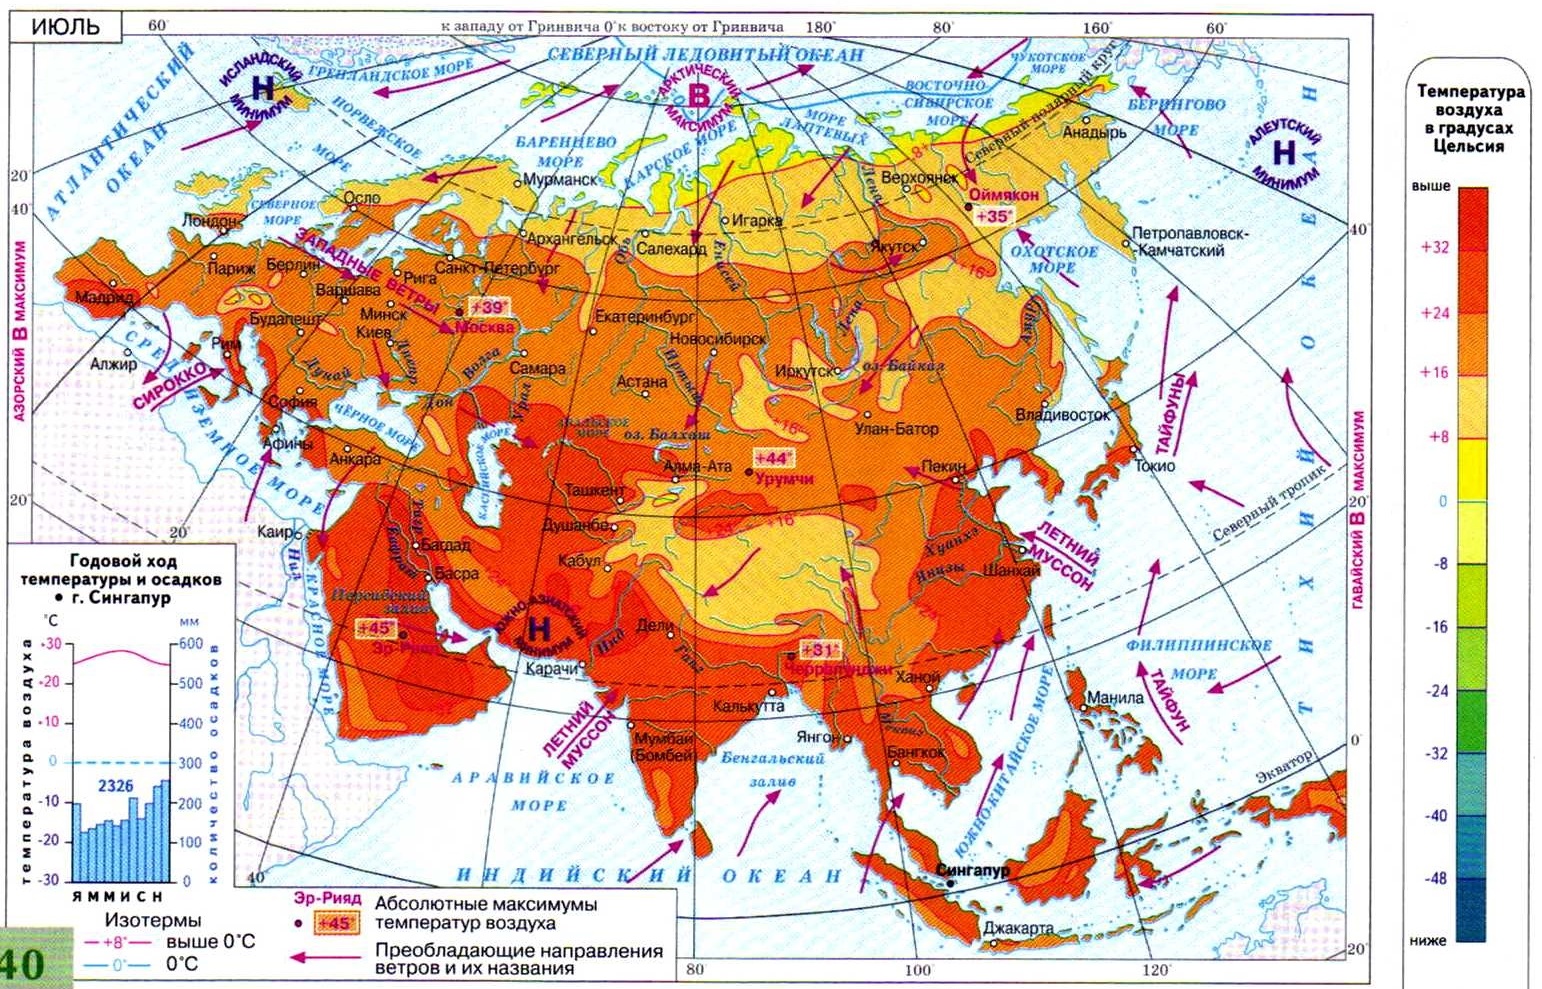 “Climate, natural areas of Eurasia